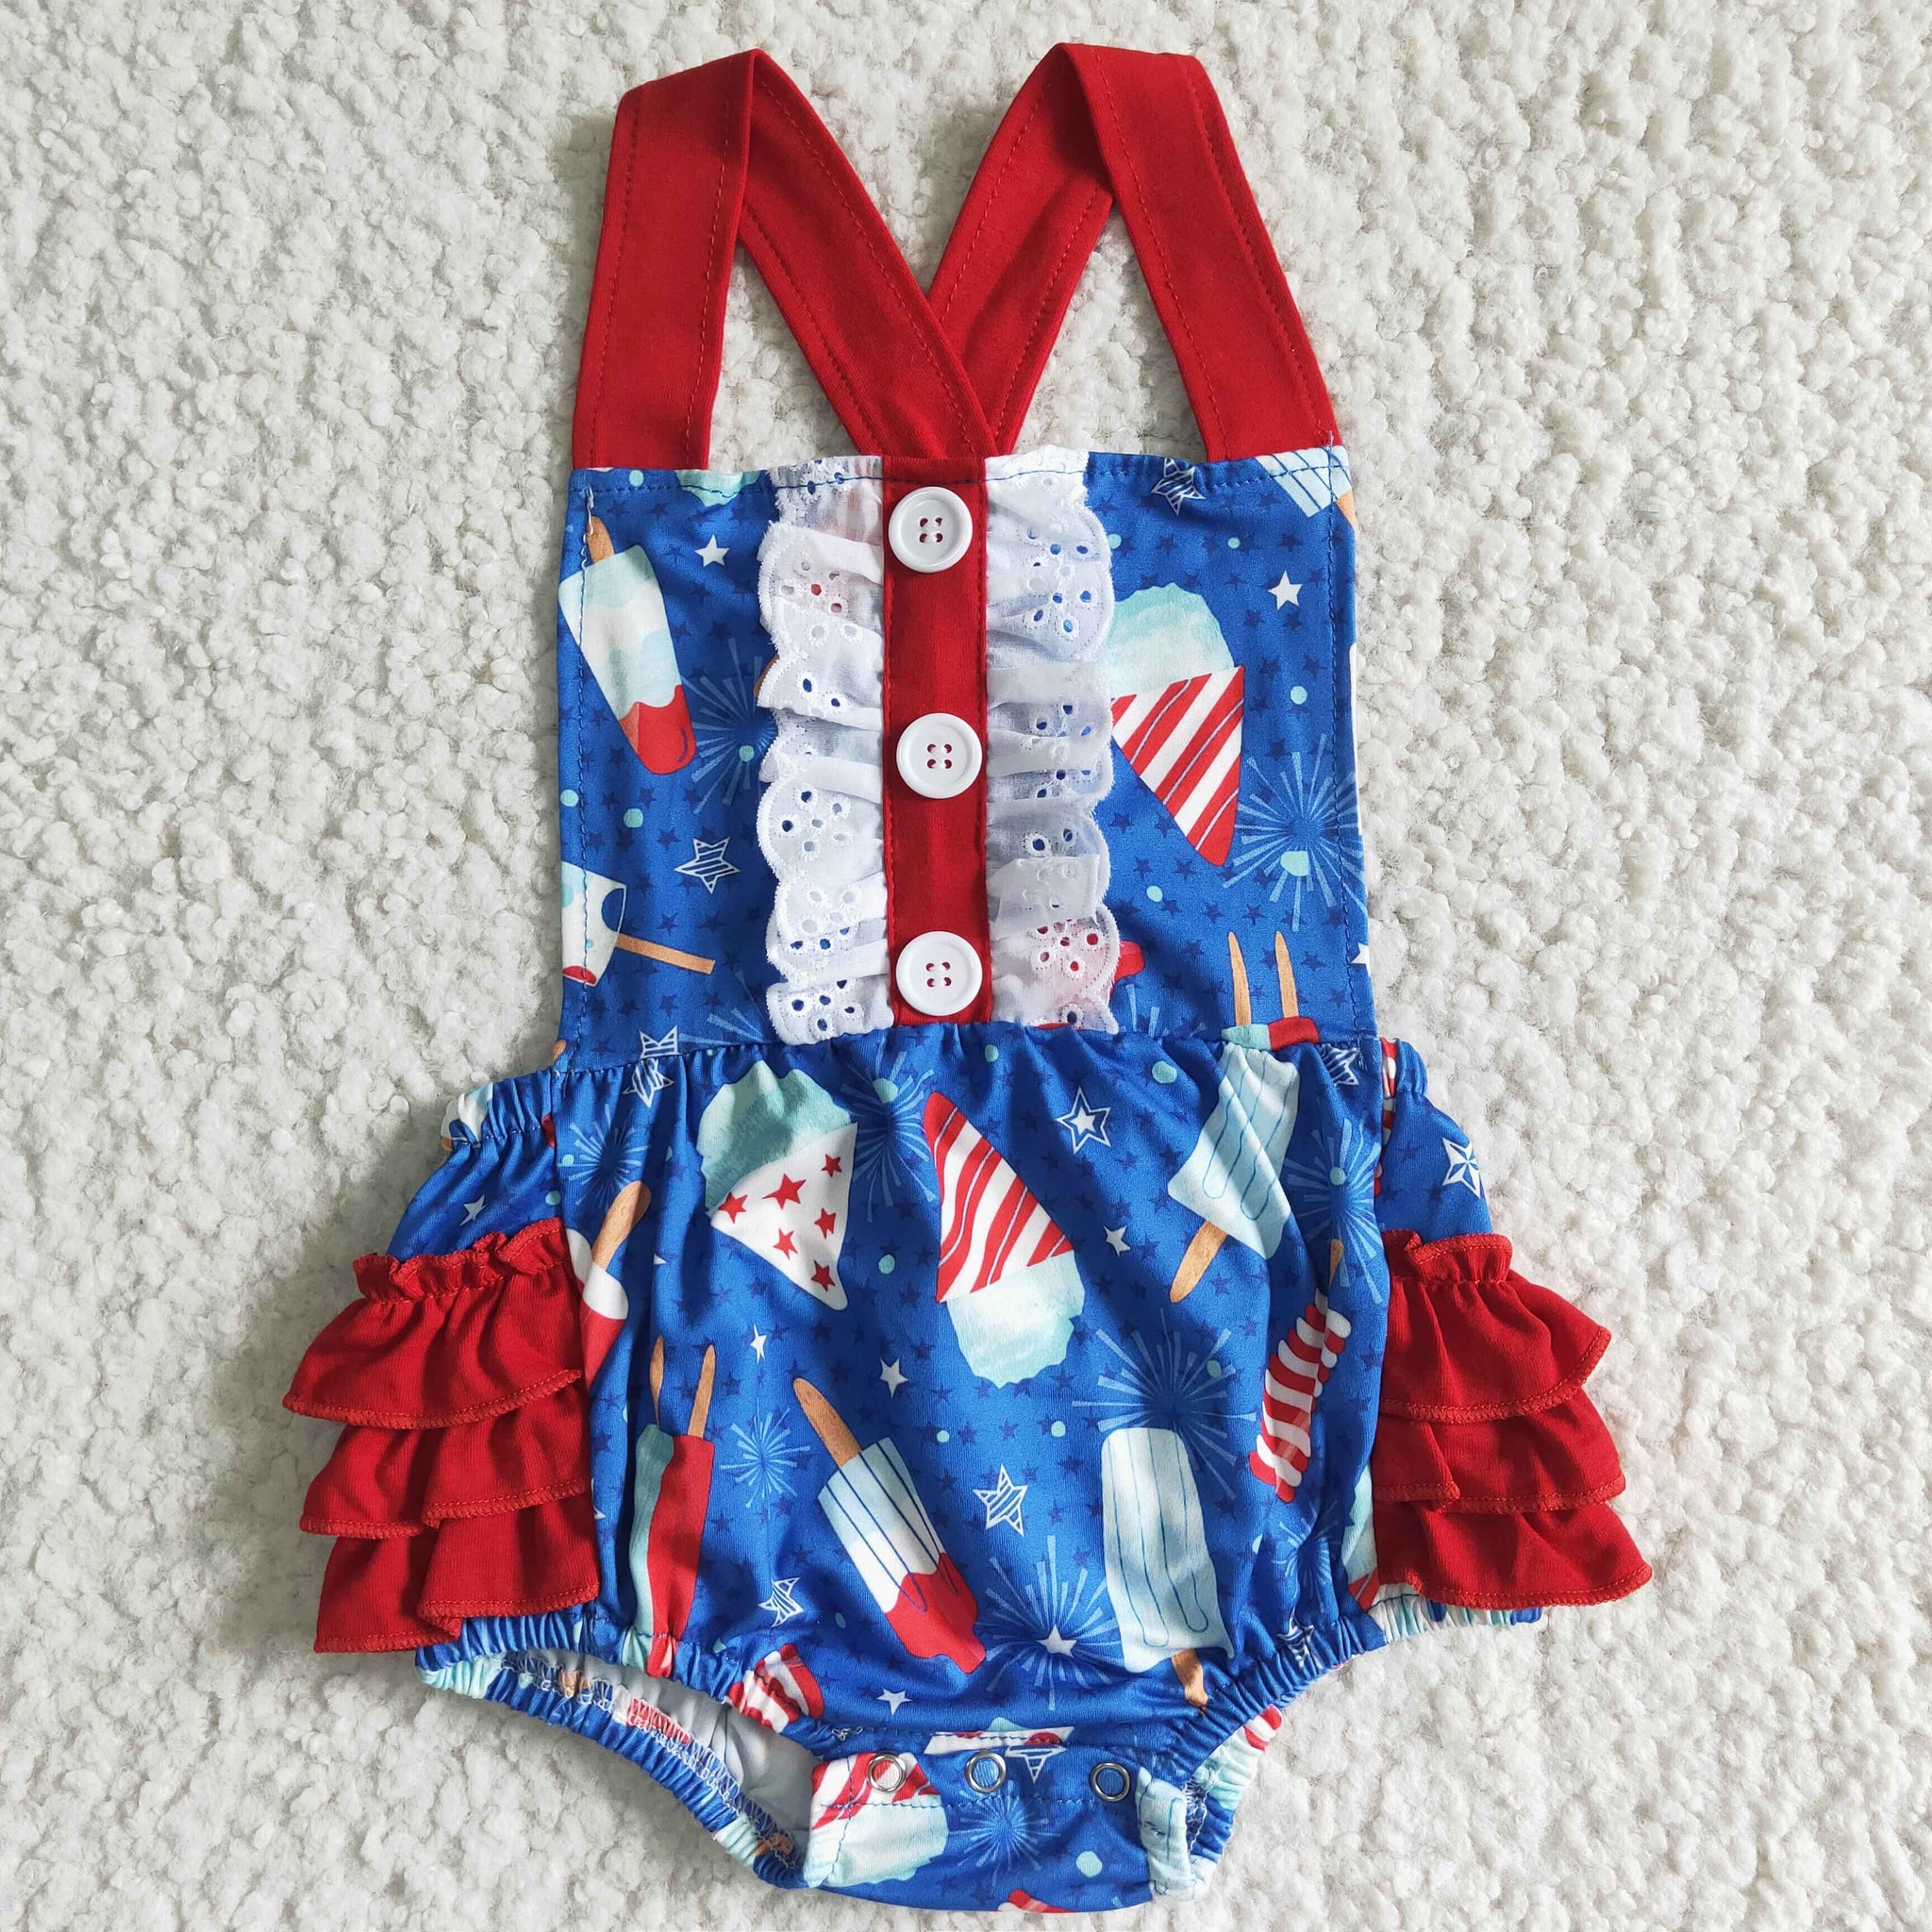 SR0015 girl clothes july 4th bubble